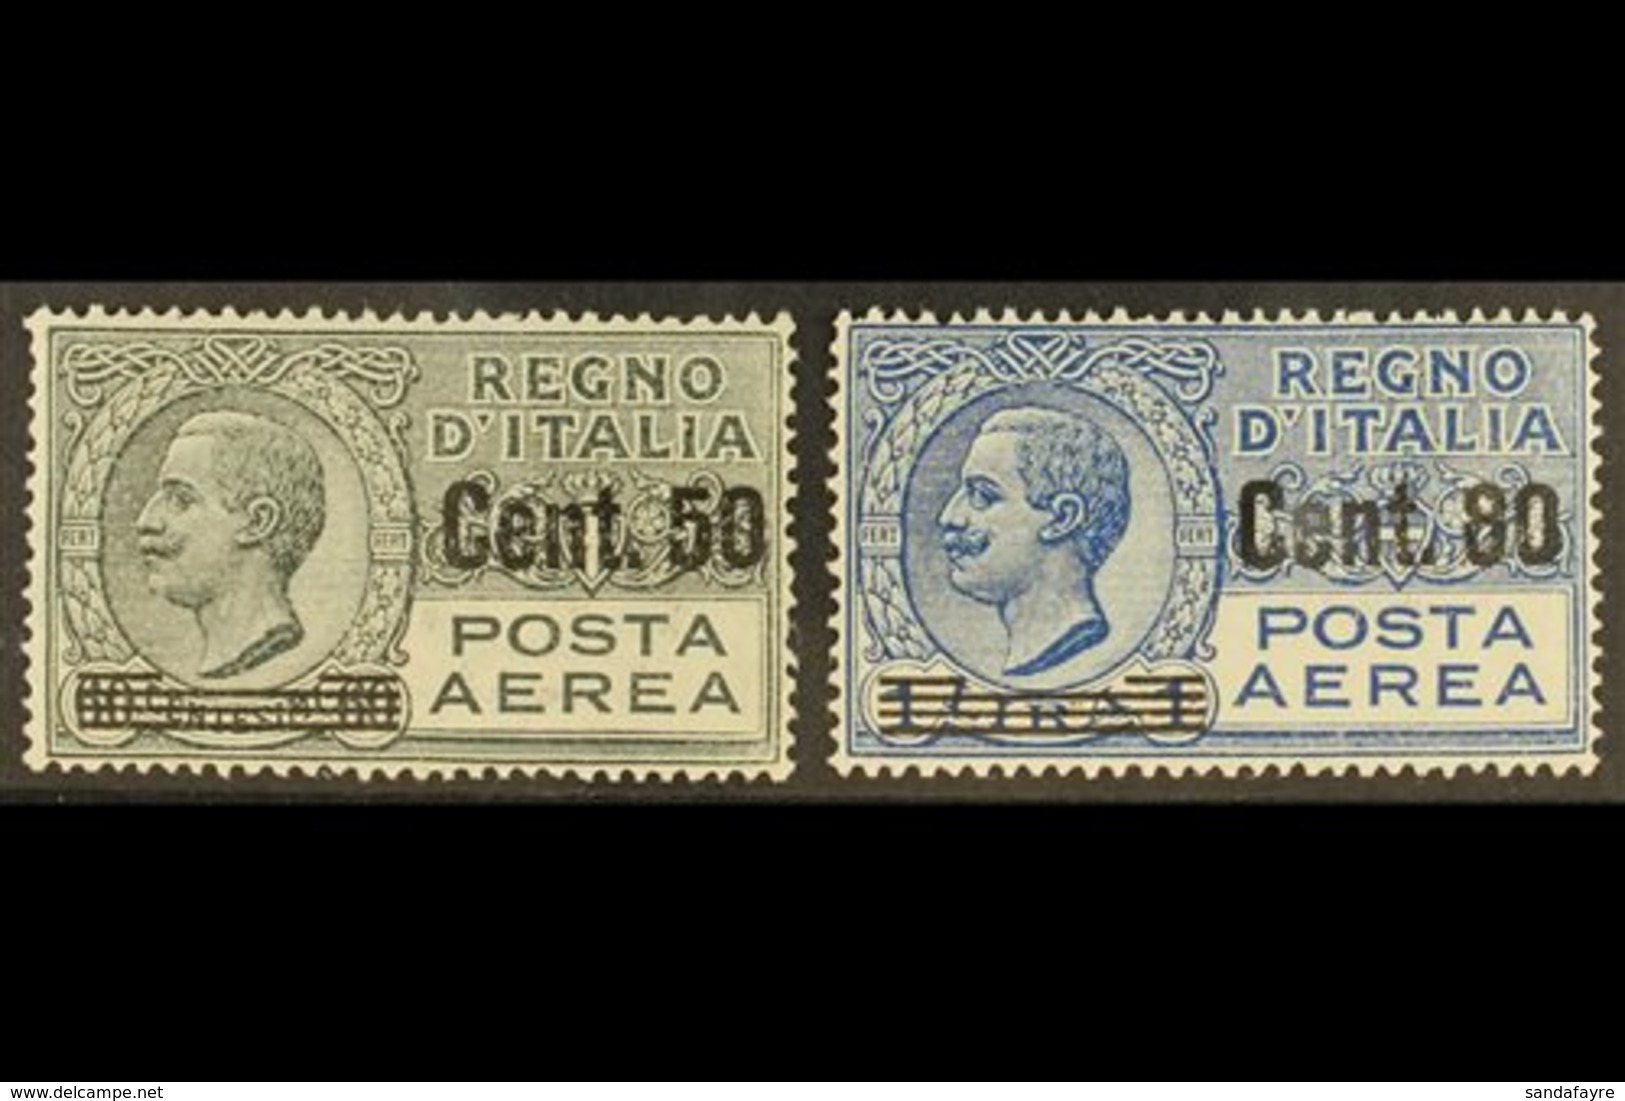 1927 AIRMAILS 50c On 60c Grey & 80c On 1l Blue, Sassone 8/9, Mi 270/1, Never Hinged Mint (2 Stamps). For More Images, Pl - Non Classificati